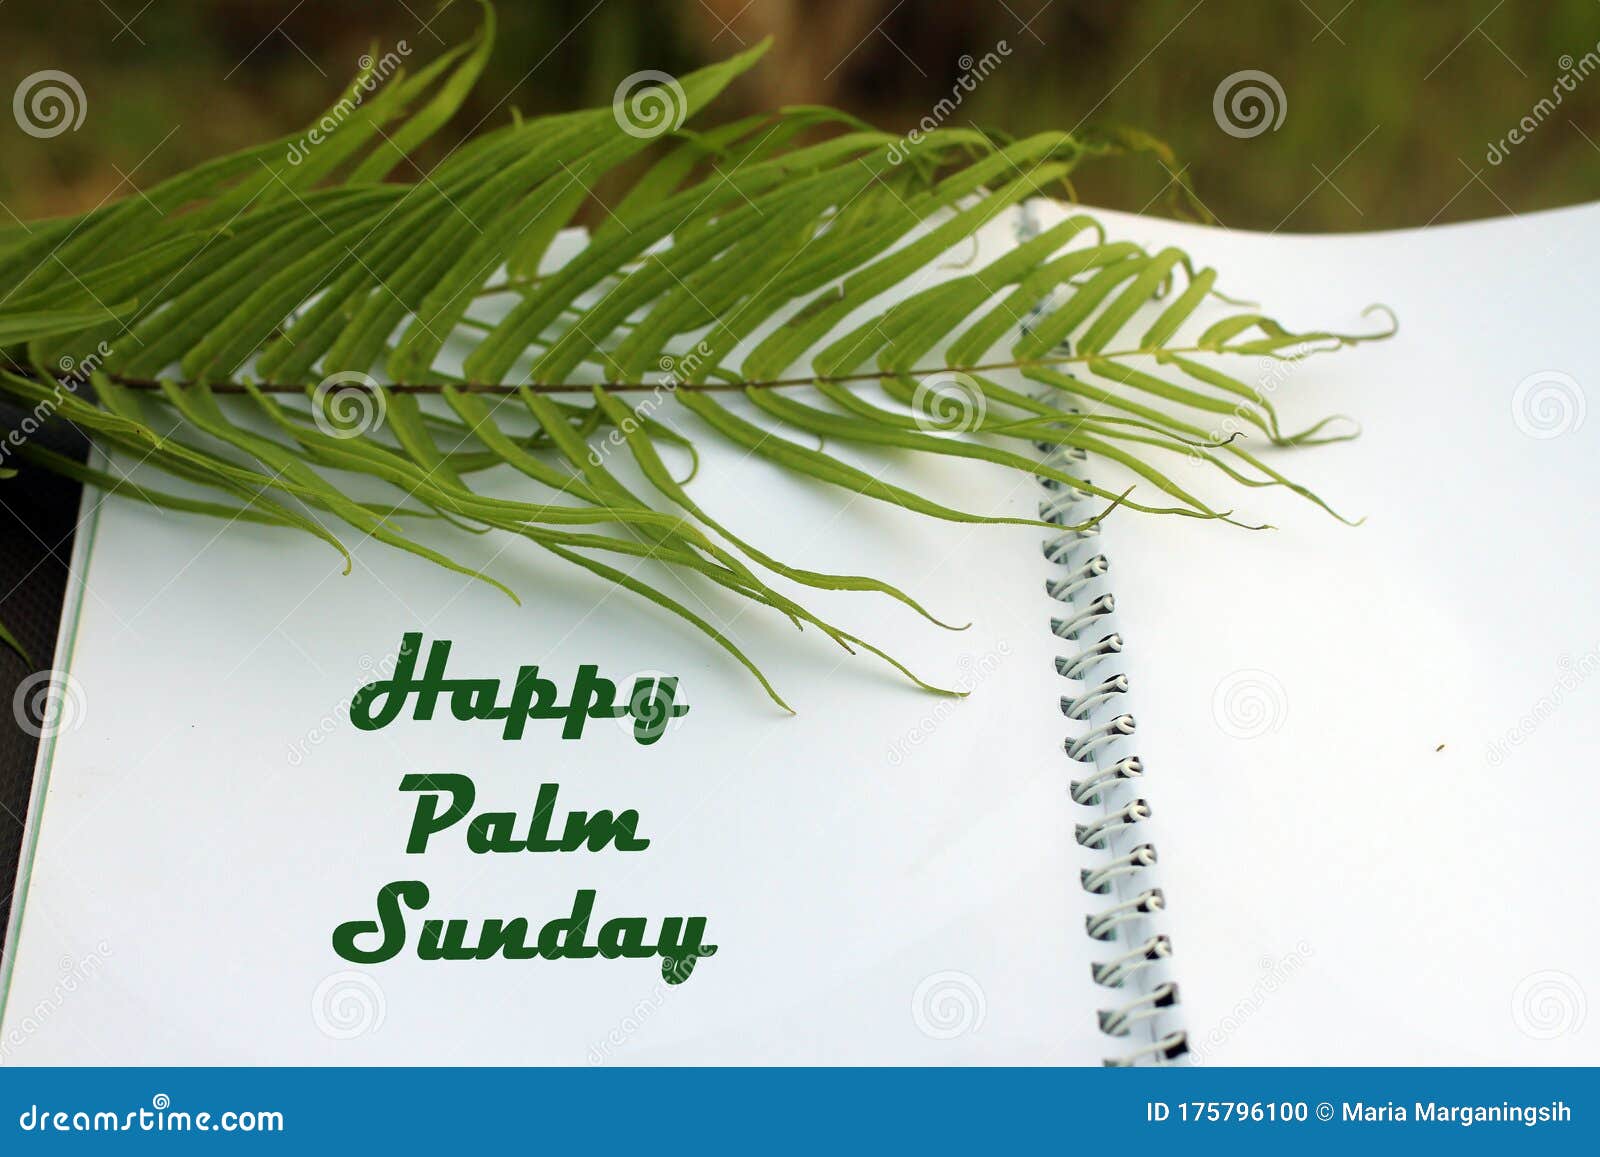 Happy Palm Sunday. Palm Sunday Concept with Fern Leaf on an Open ...